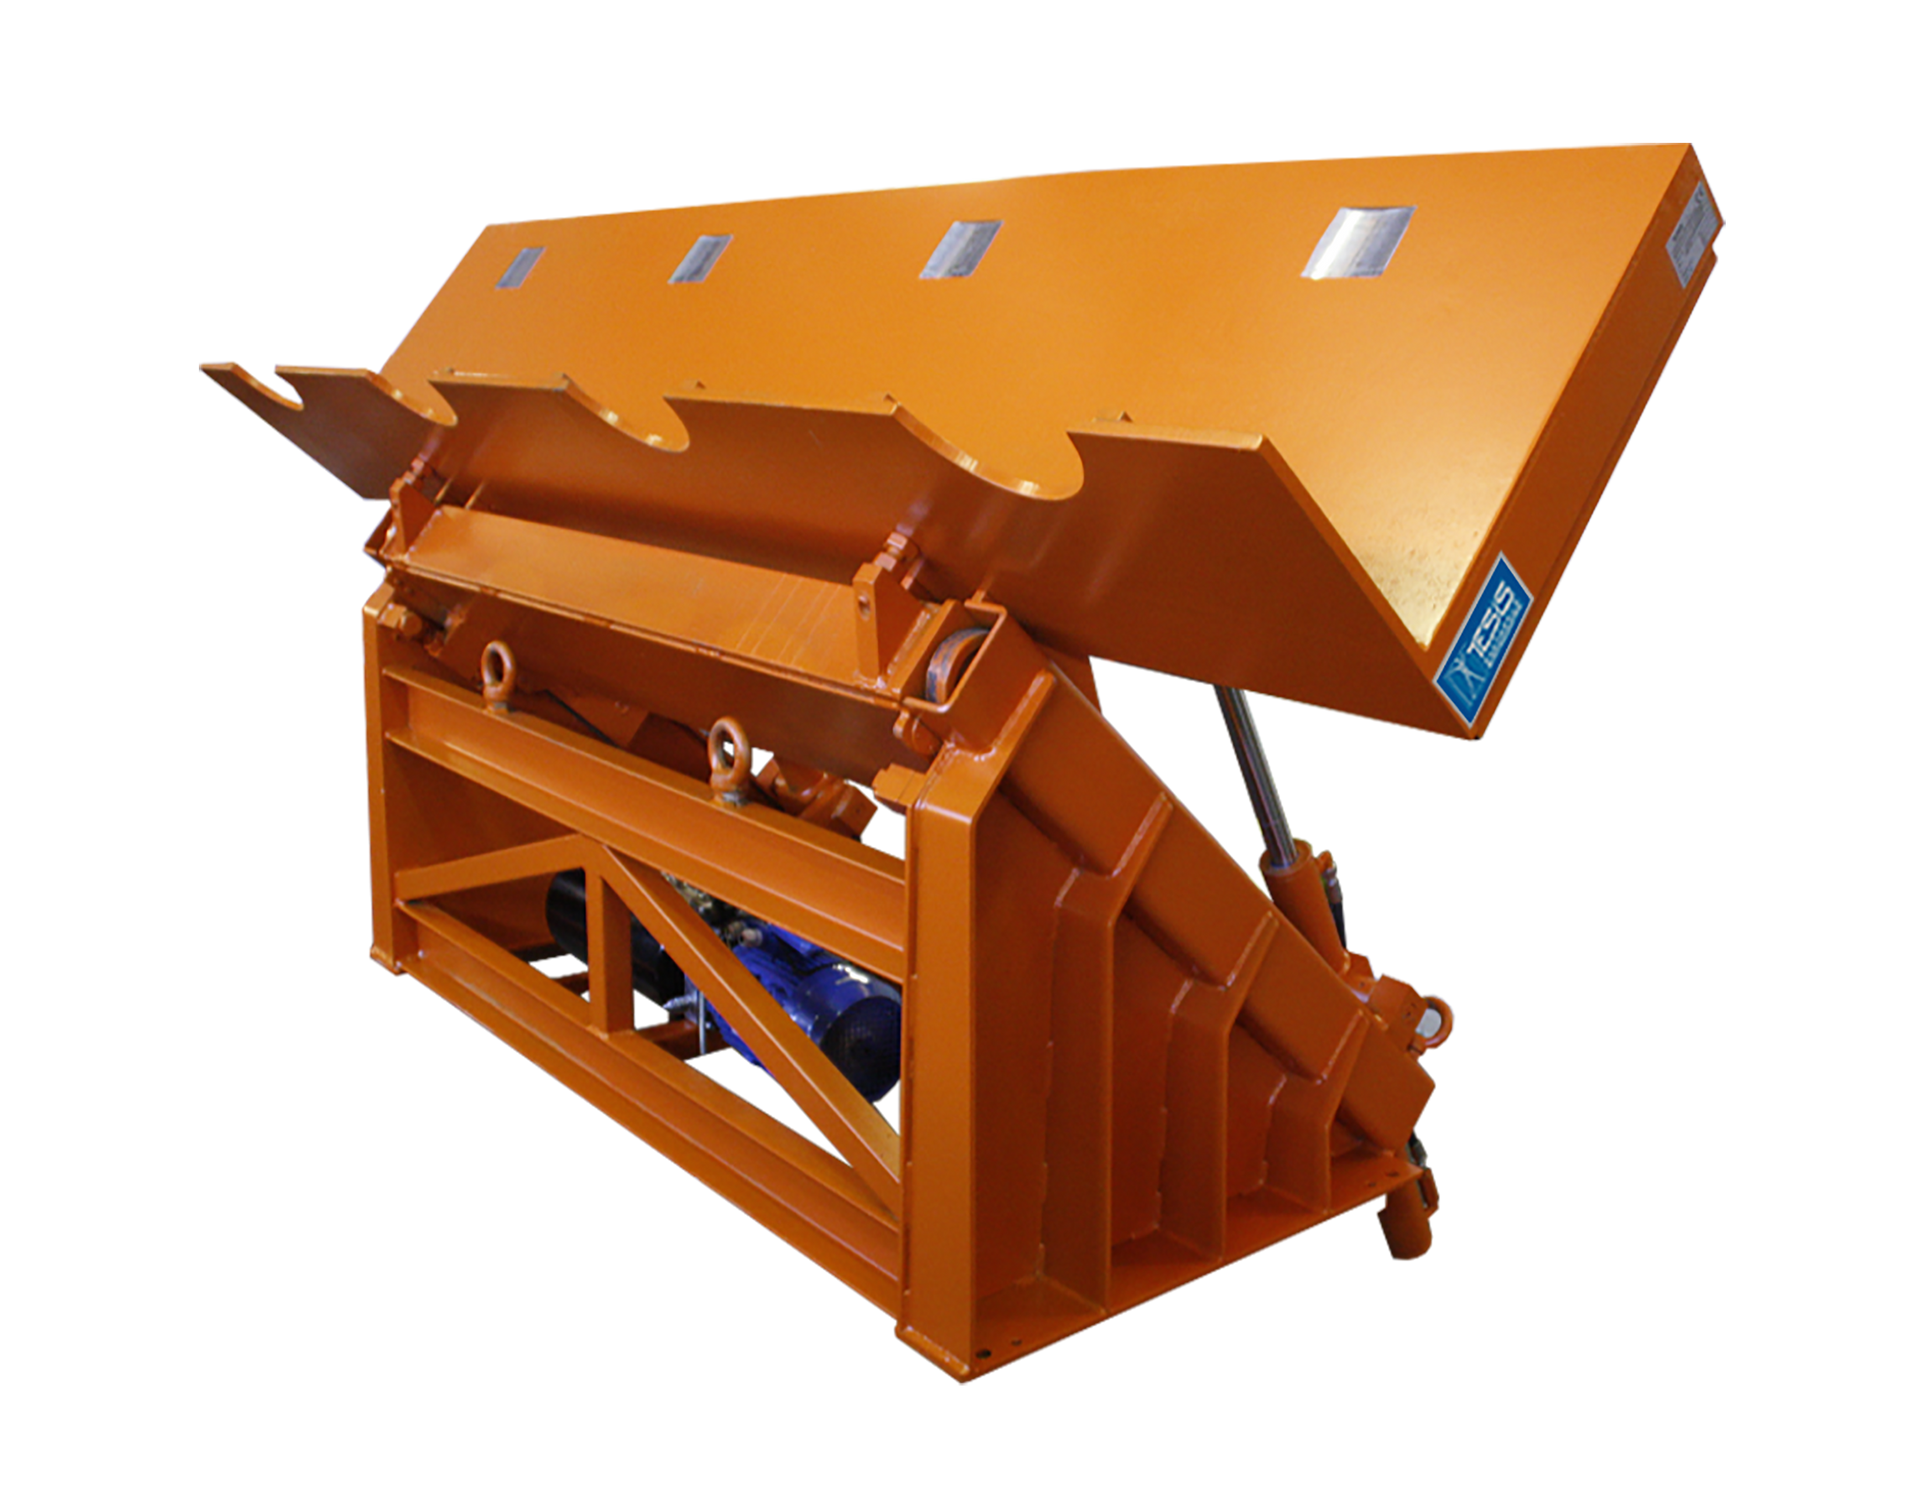 Reel tipper with lifting and tilting multi-position table, hydraulic tilter for handling multiple rolls or reels